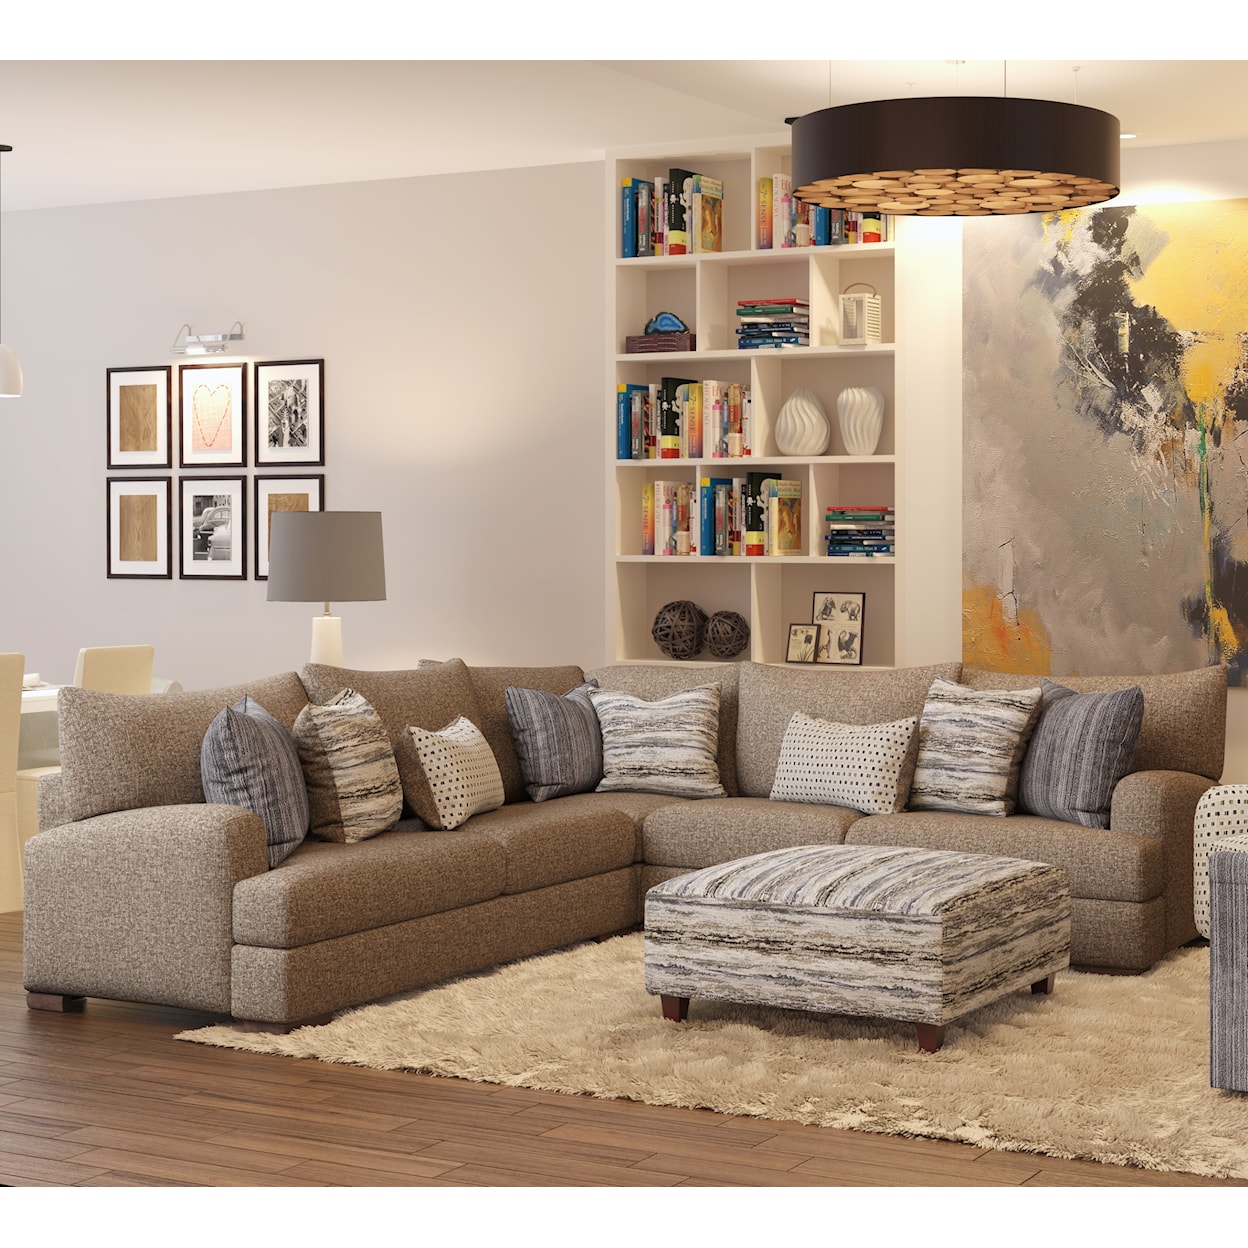 VFM Signature 51 MARTY FOSSIL 3-Piece Sectional